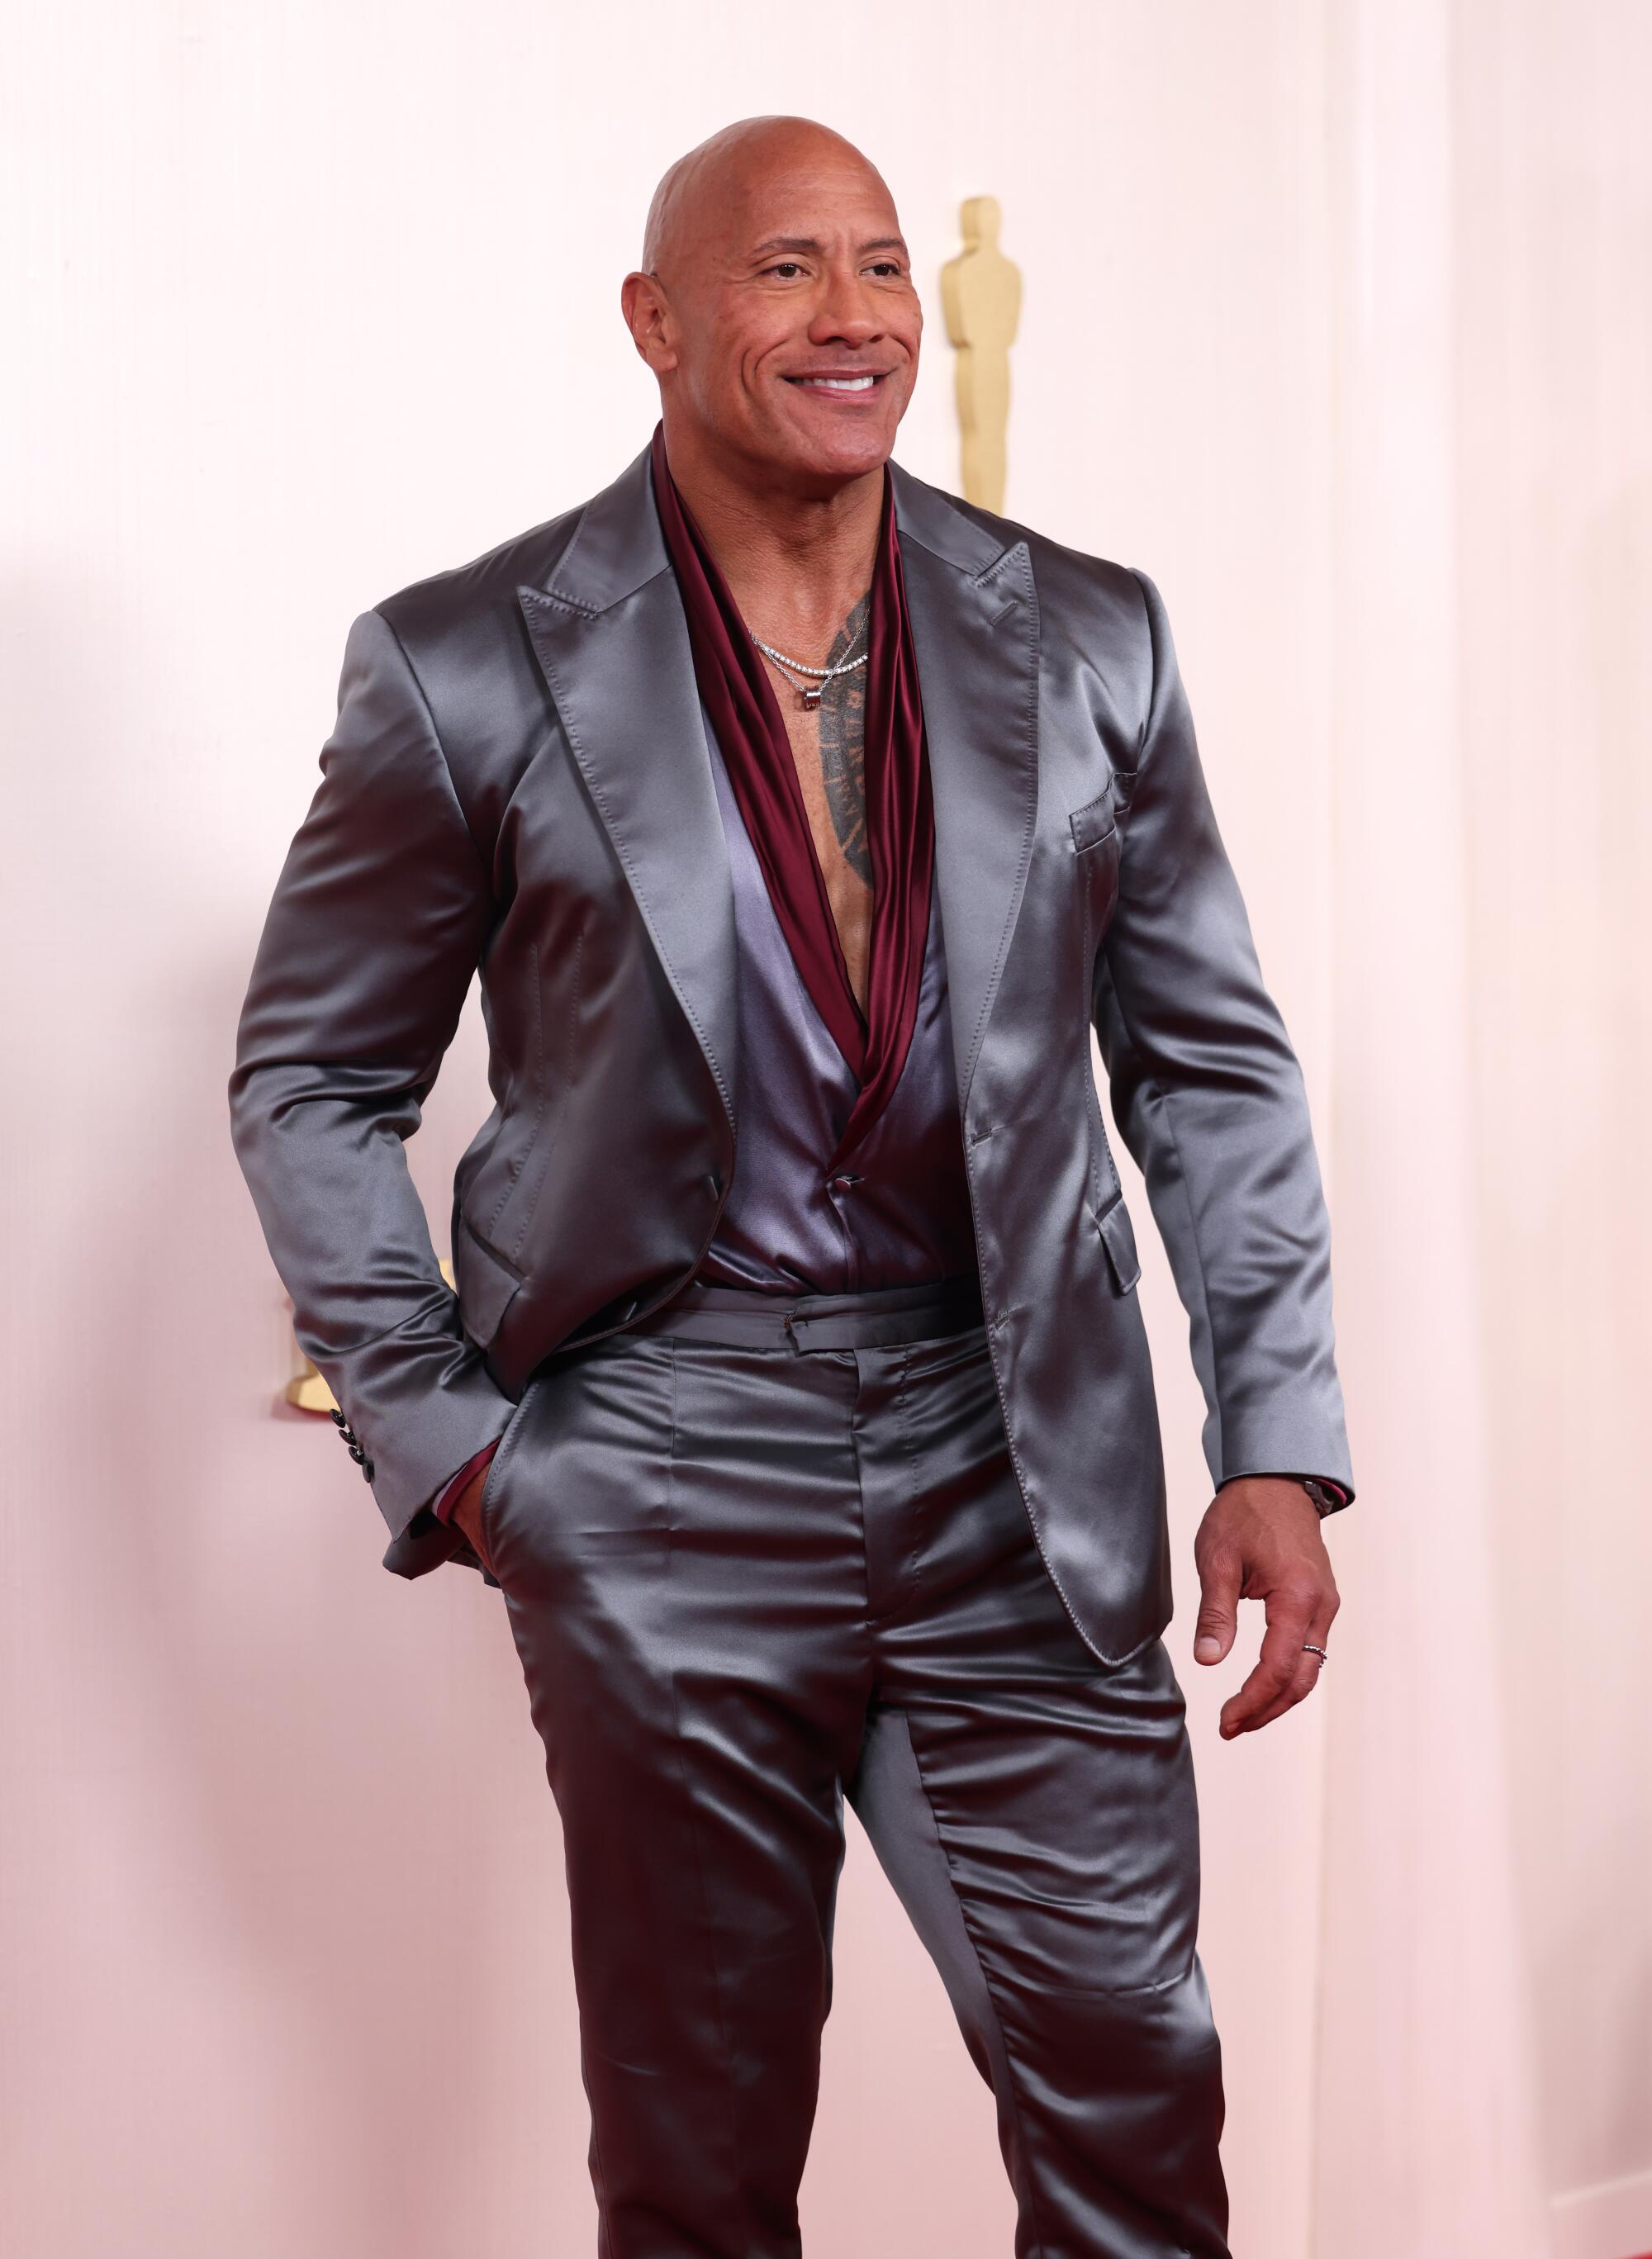 Dwayne Johnson wears a silk silver suit with burgundy trim on his shirt.